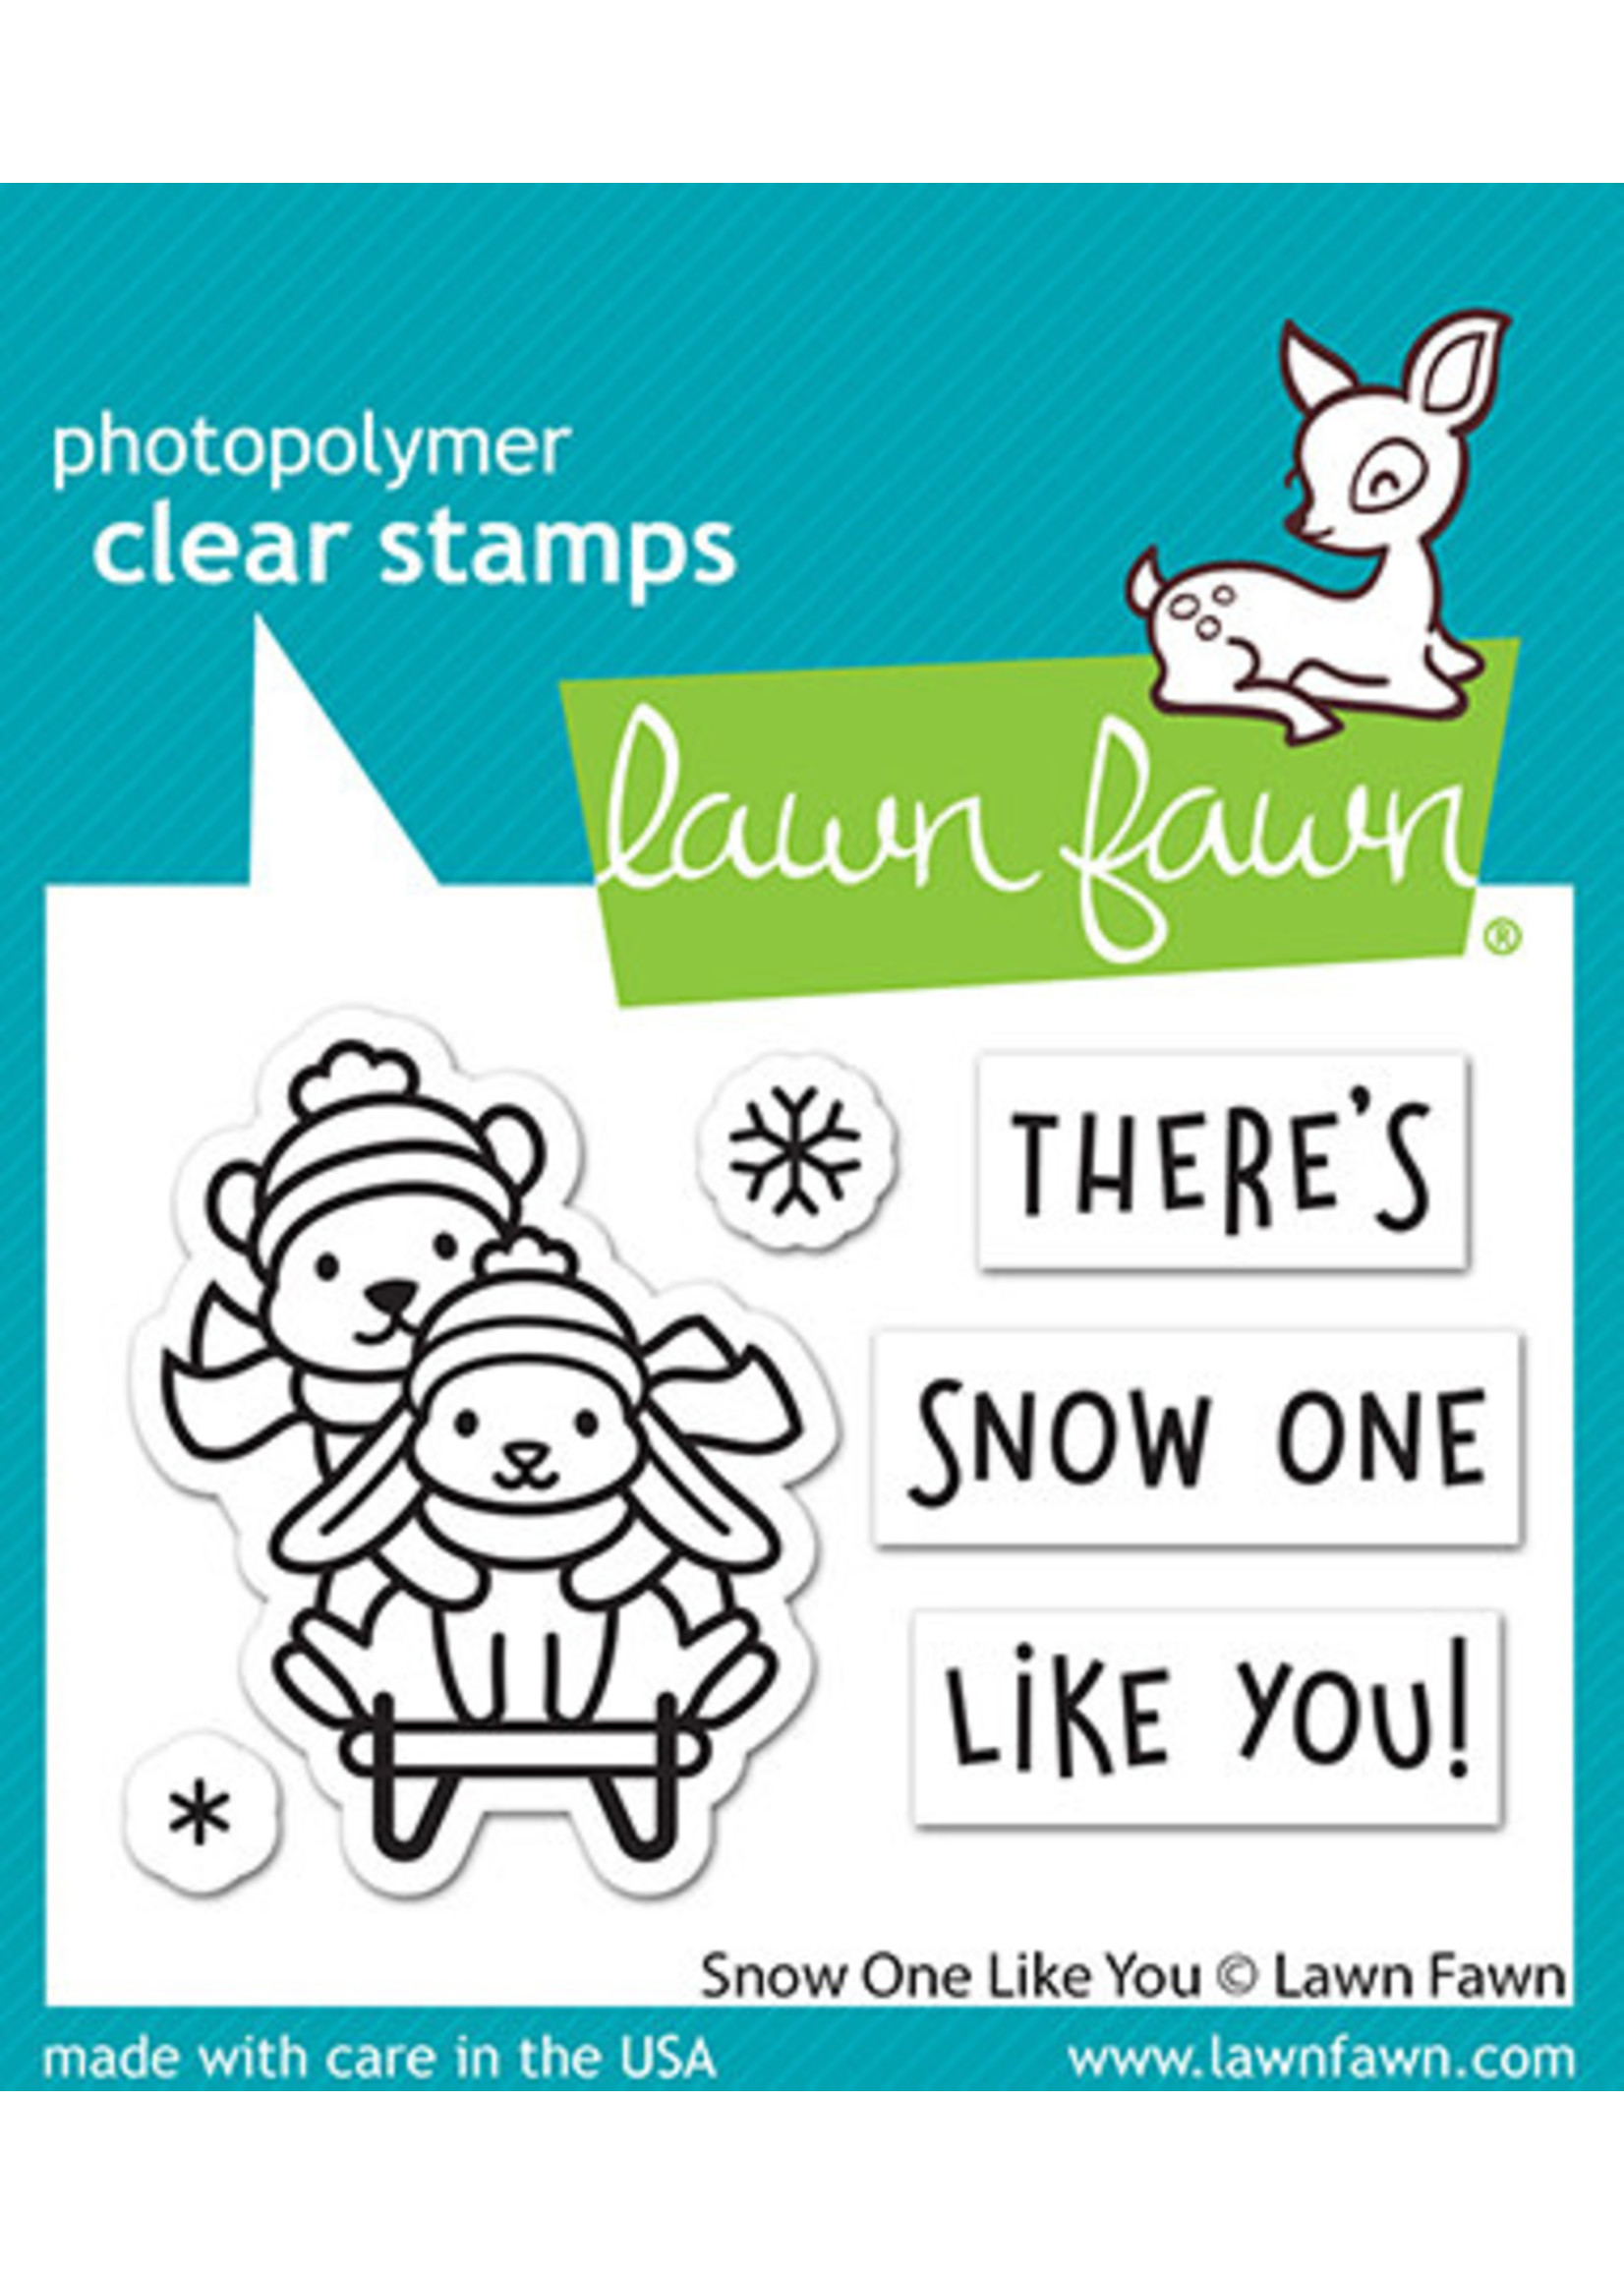 Lawn Fawn snow one like you stamp